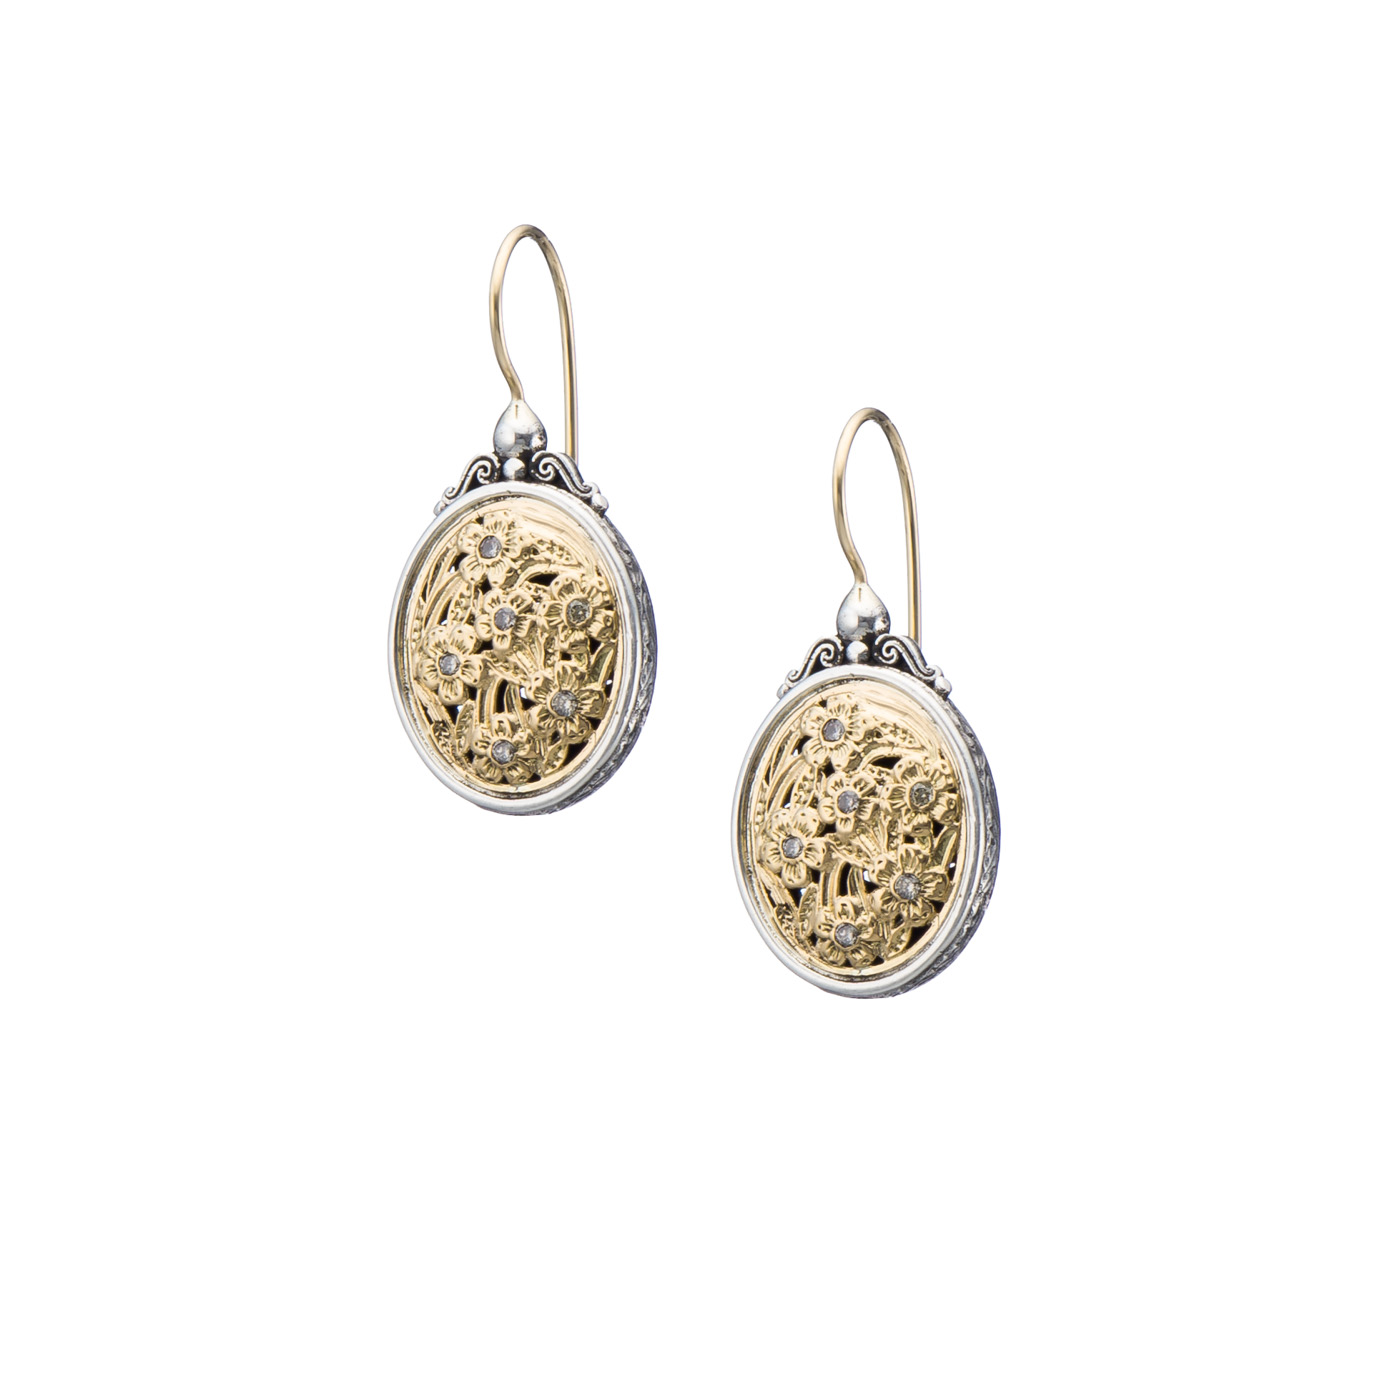 Harmony Oval Earrings in 18K Gold and Sterling Silver with Brown Diamonds